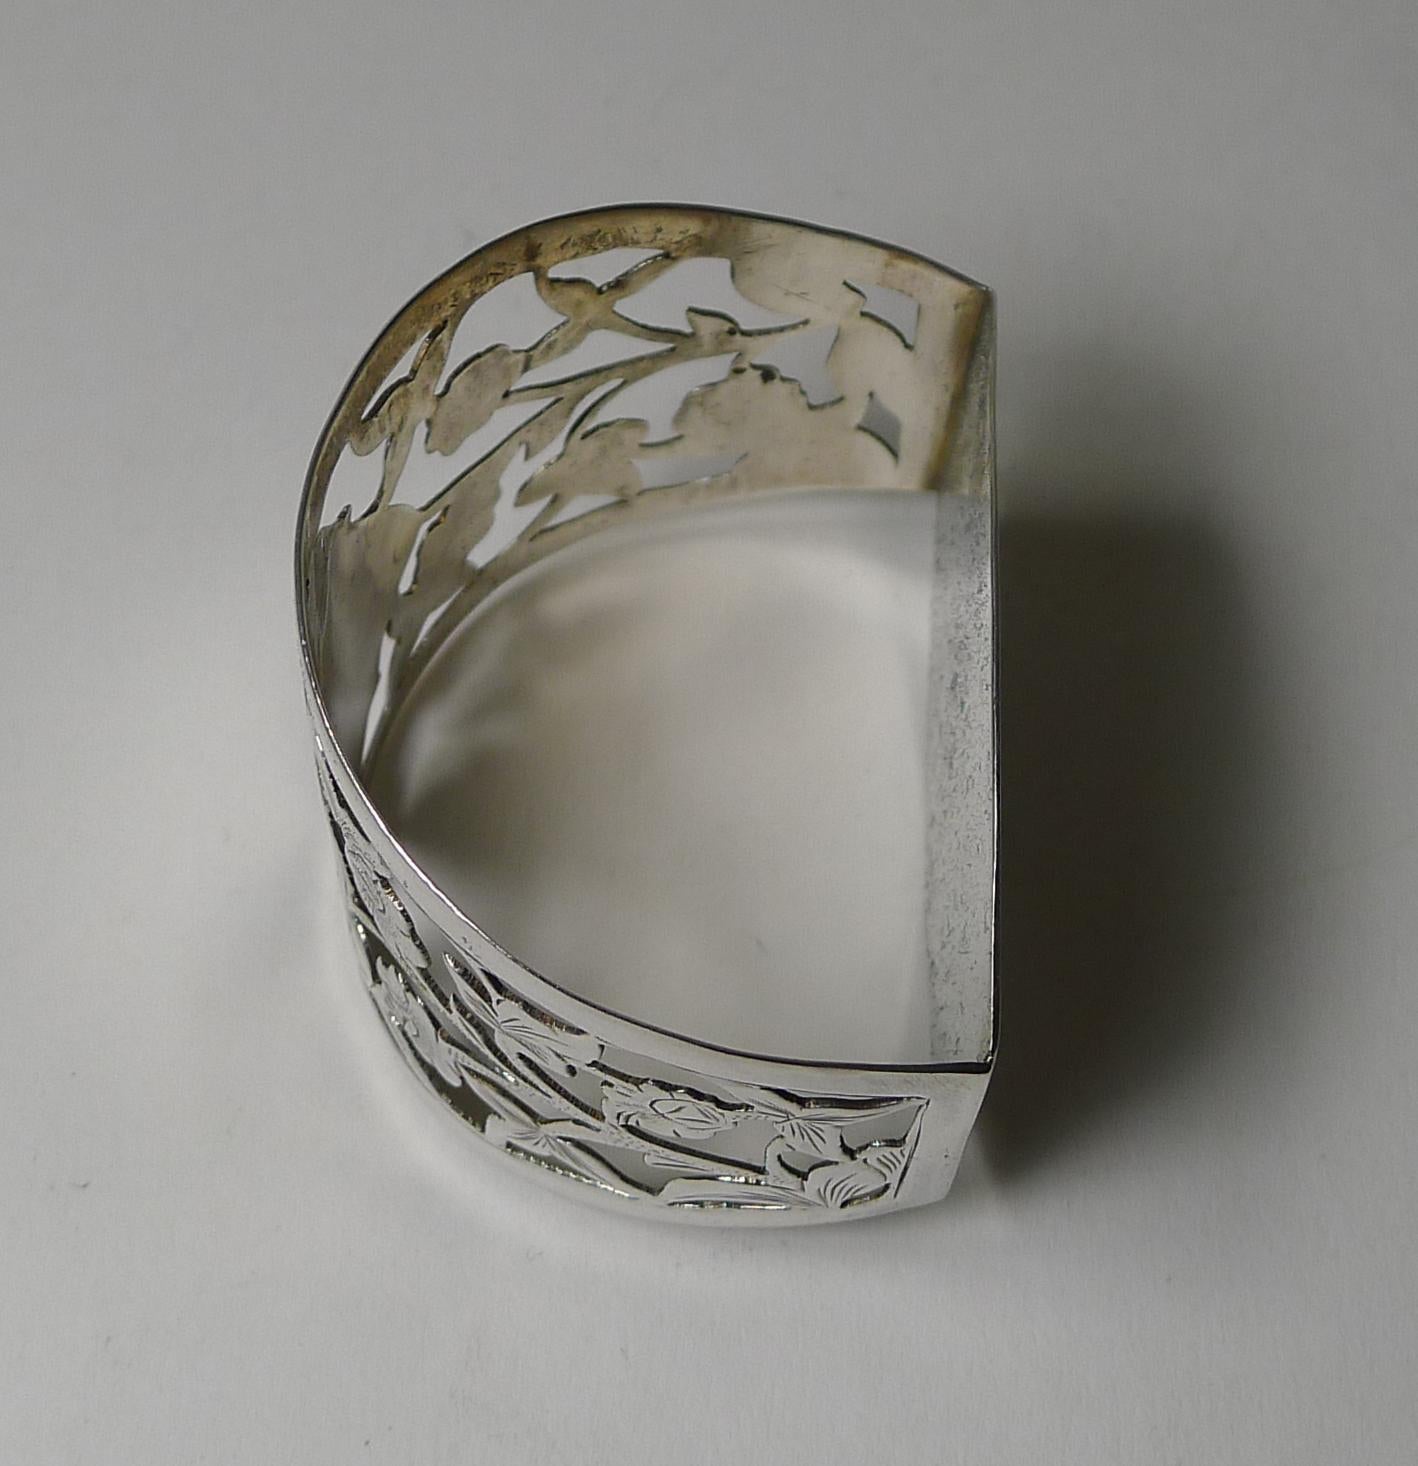 Fretwork Antique English Pierced Sterling Silver Napkin Ring, Roses